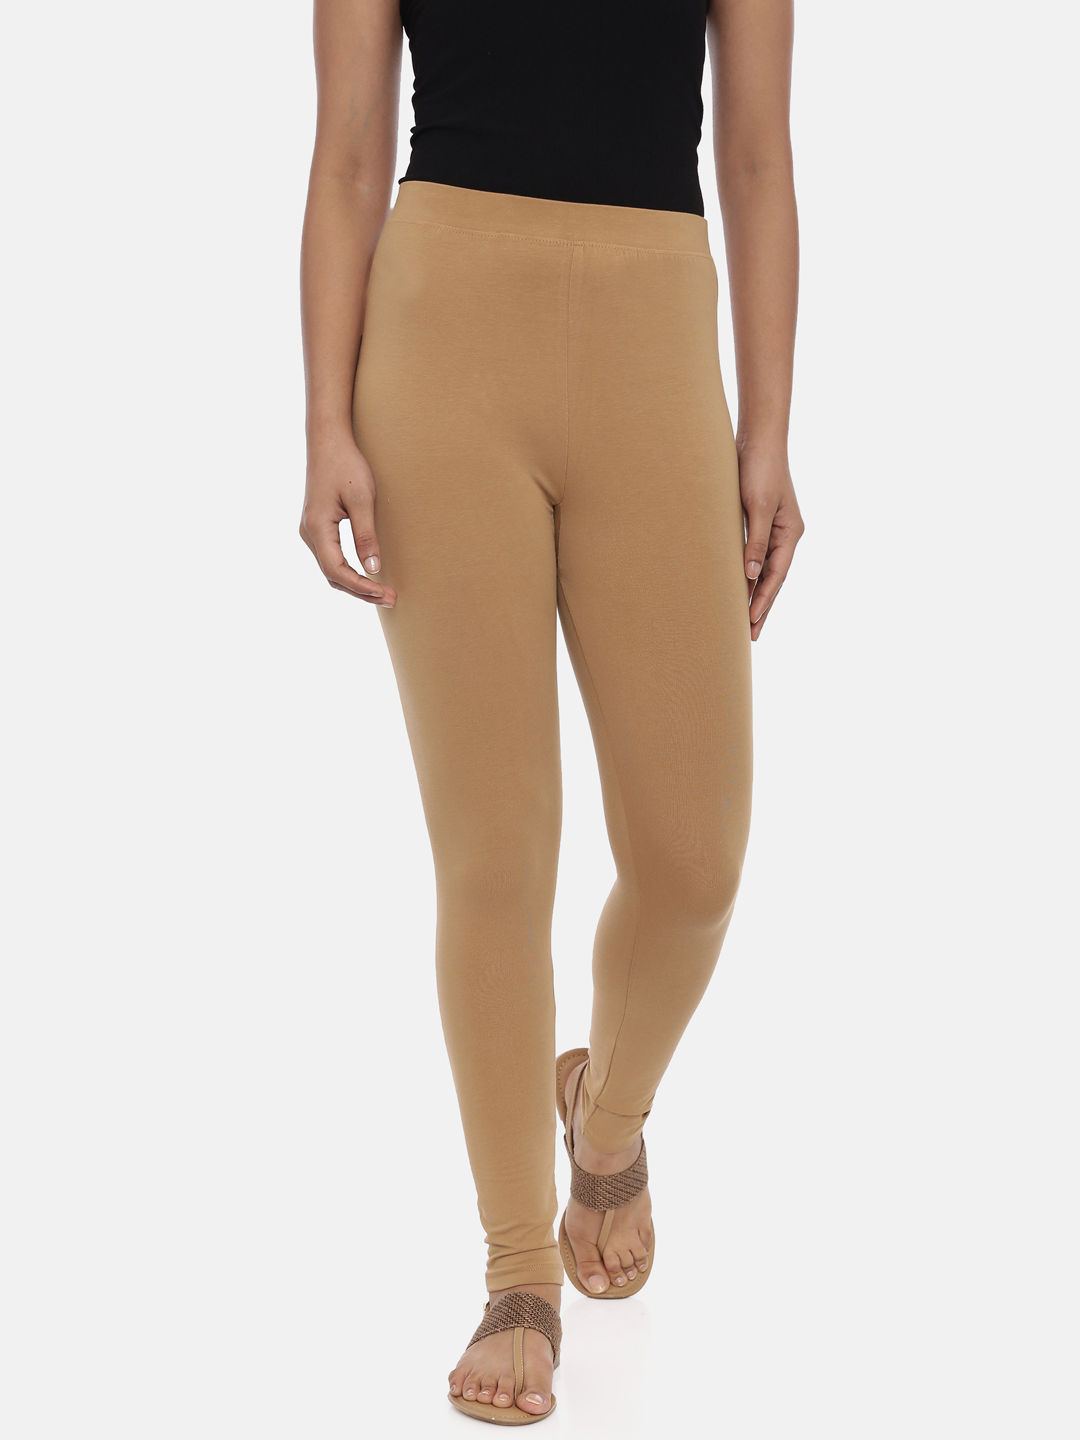 Buy Teal Ankle Length Tights Online - W for Woman